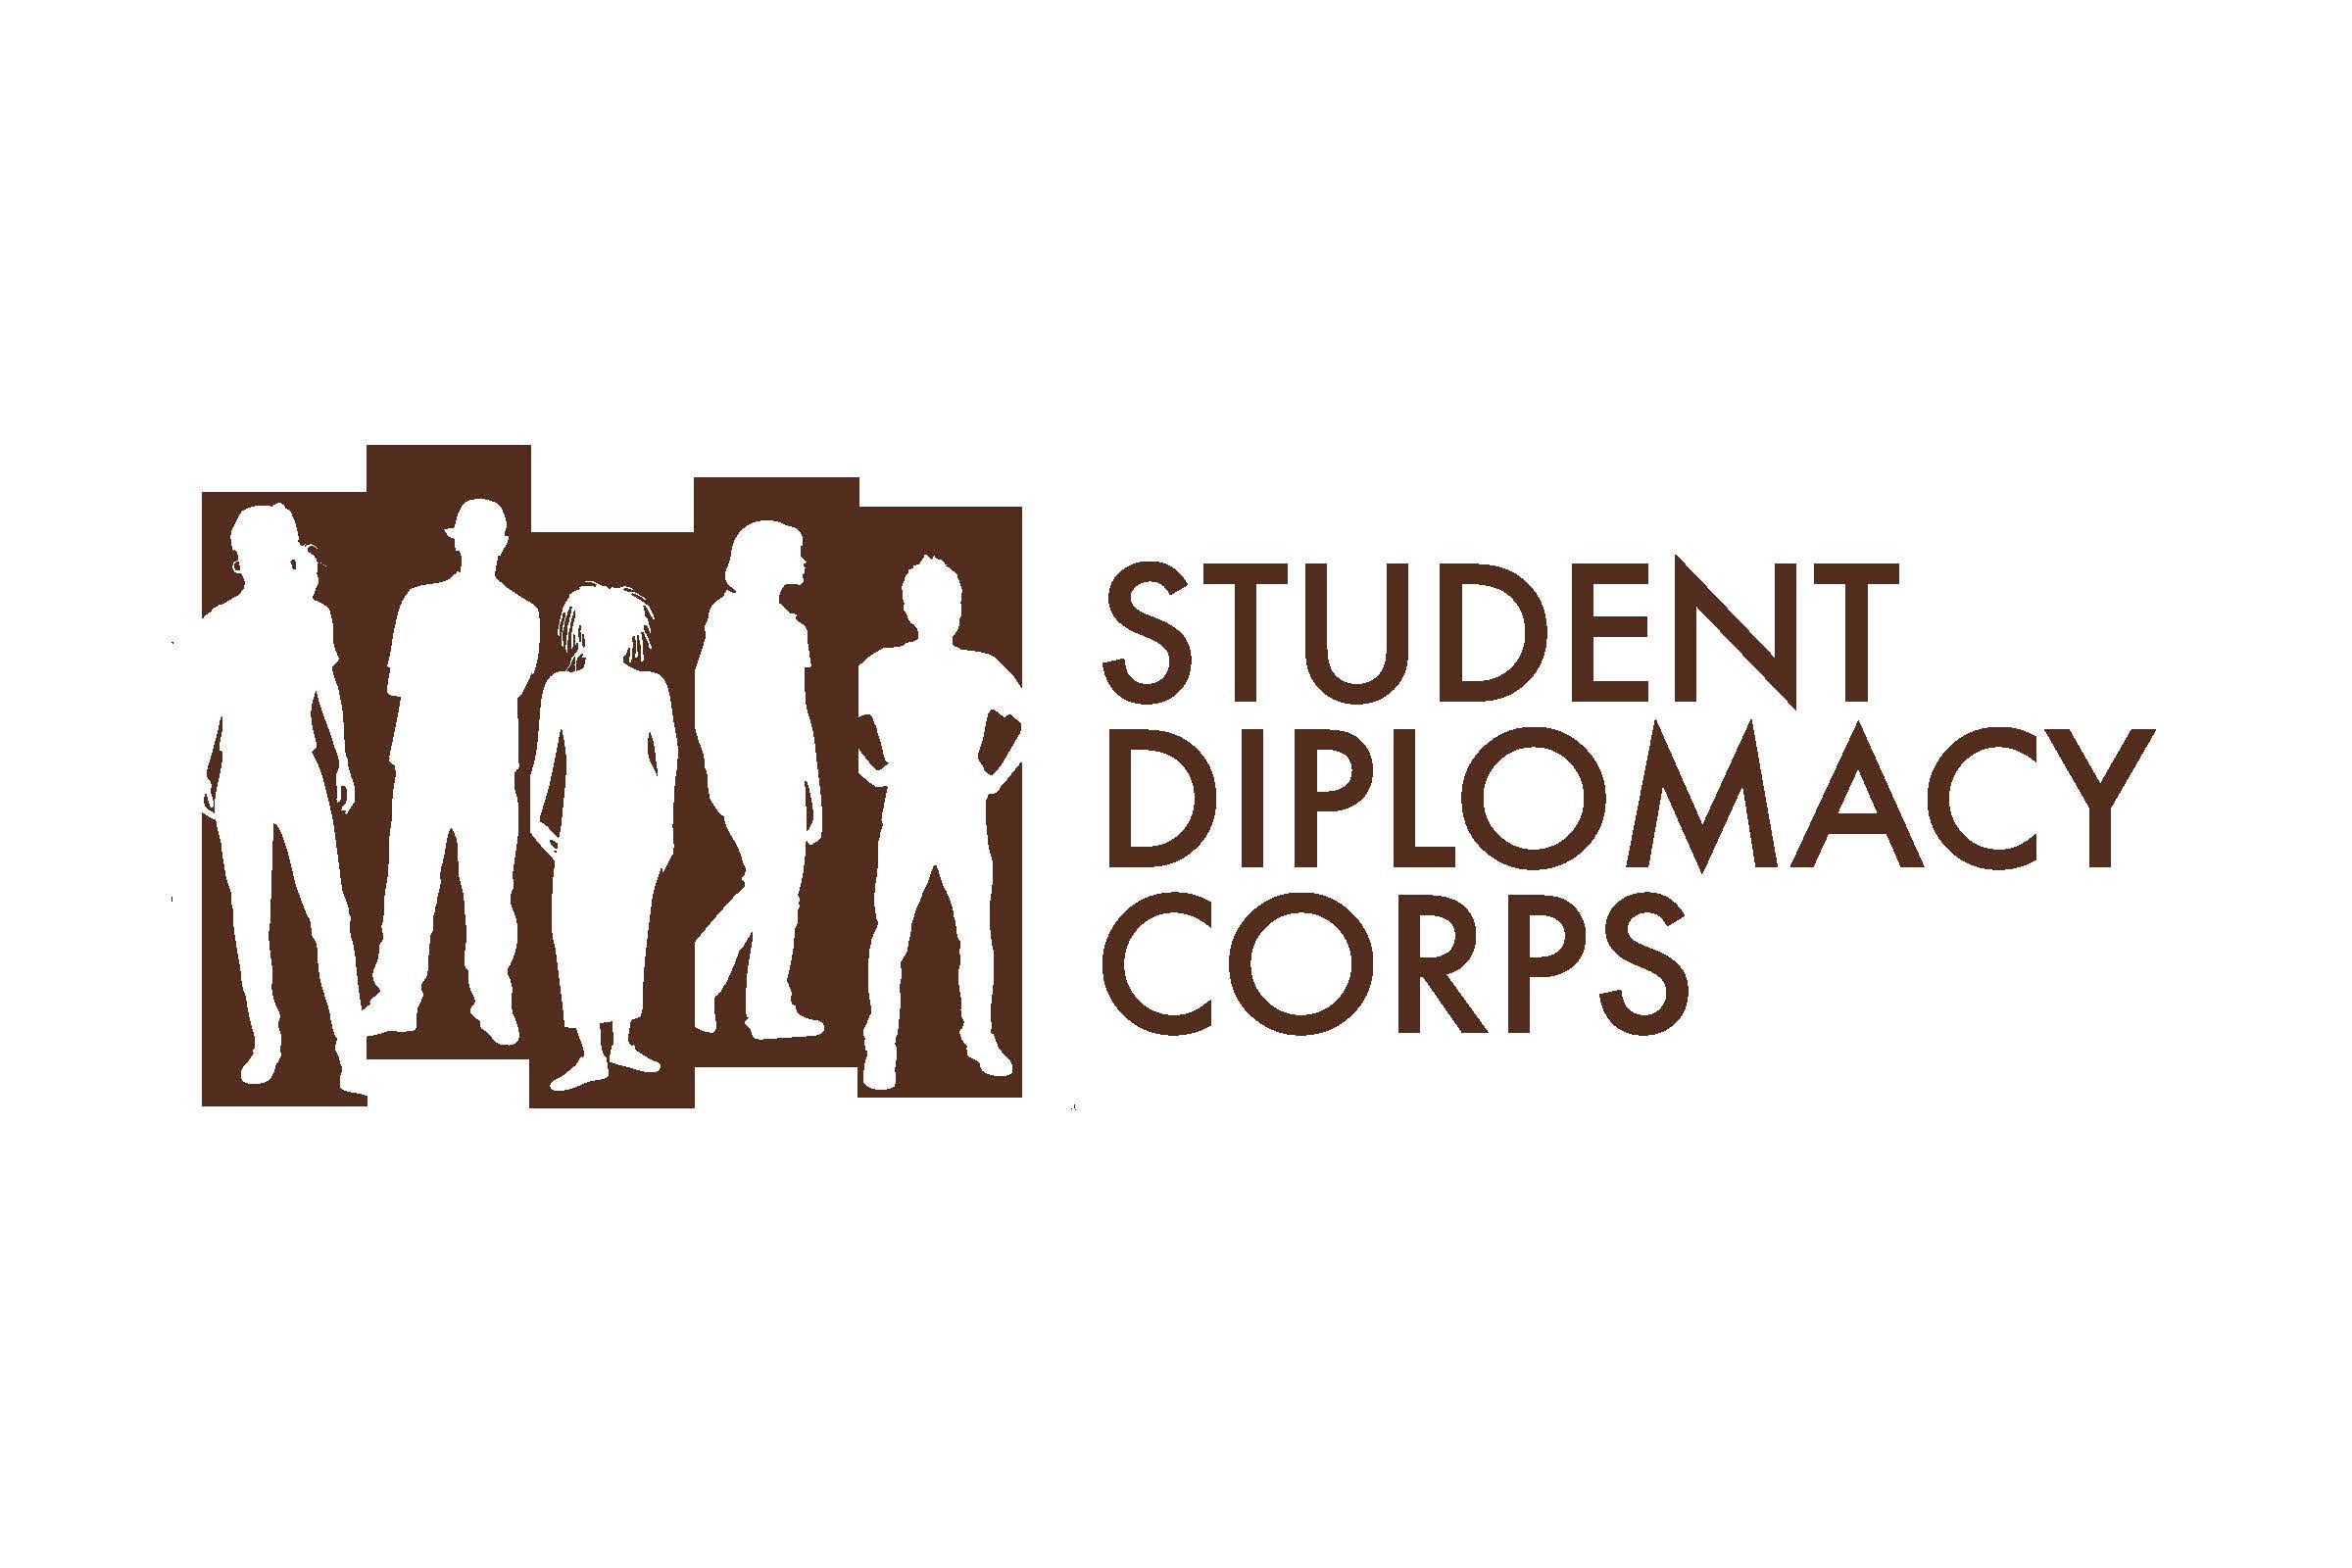 The Student Diplomacy Corps (SDC) logo